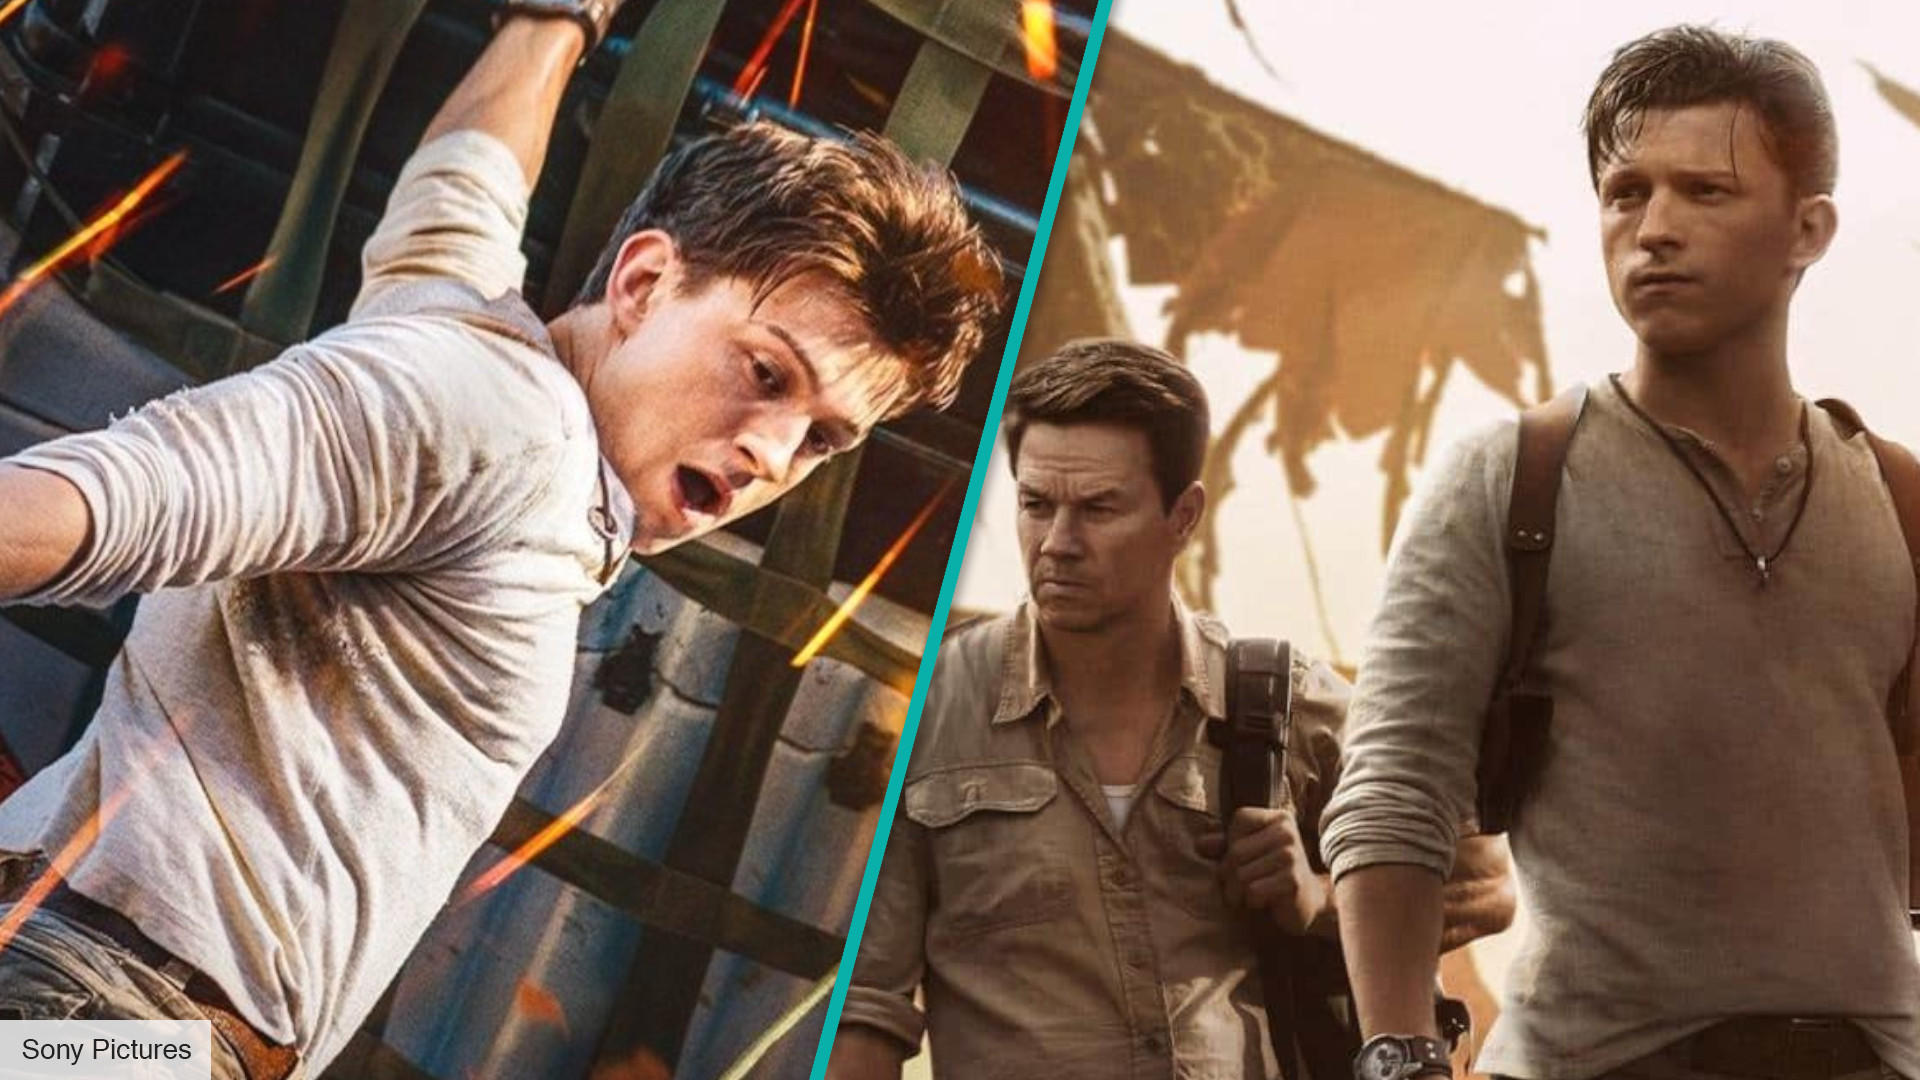 Movie Review: 'Uncharted', Recent News